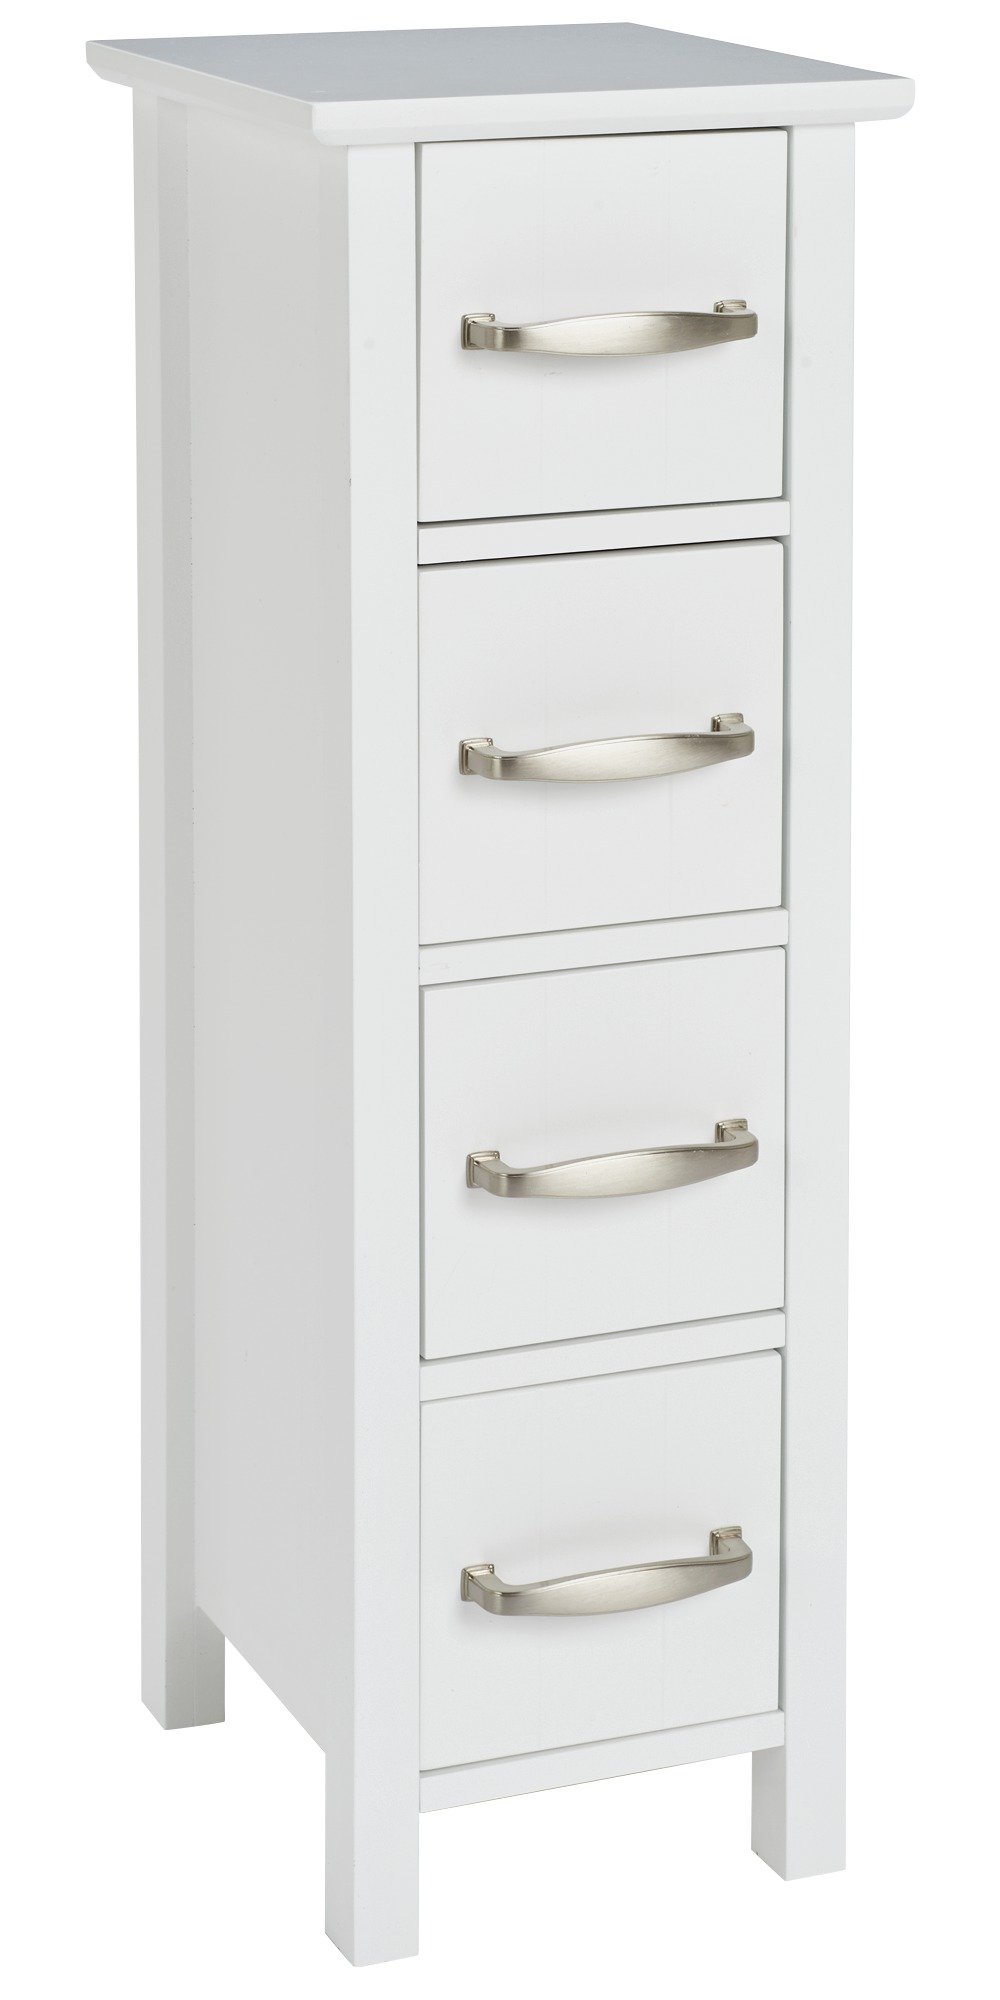 Argos Home New Tongue and Groove 4 Drawer Unit review